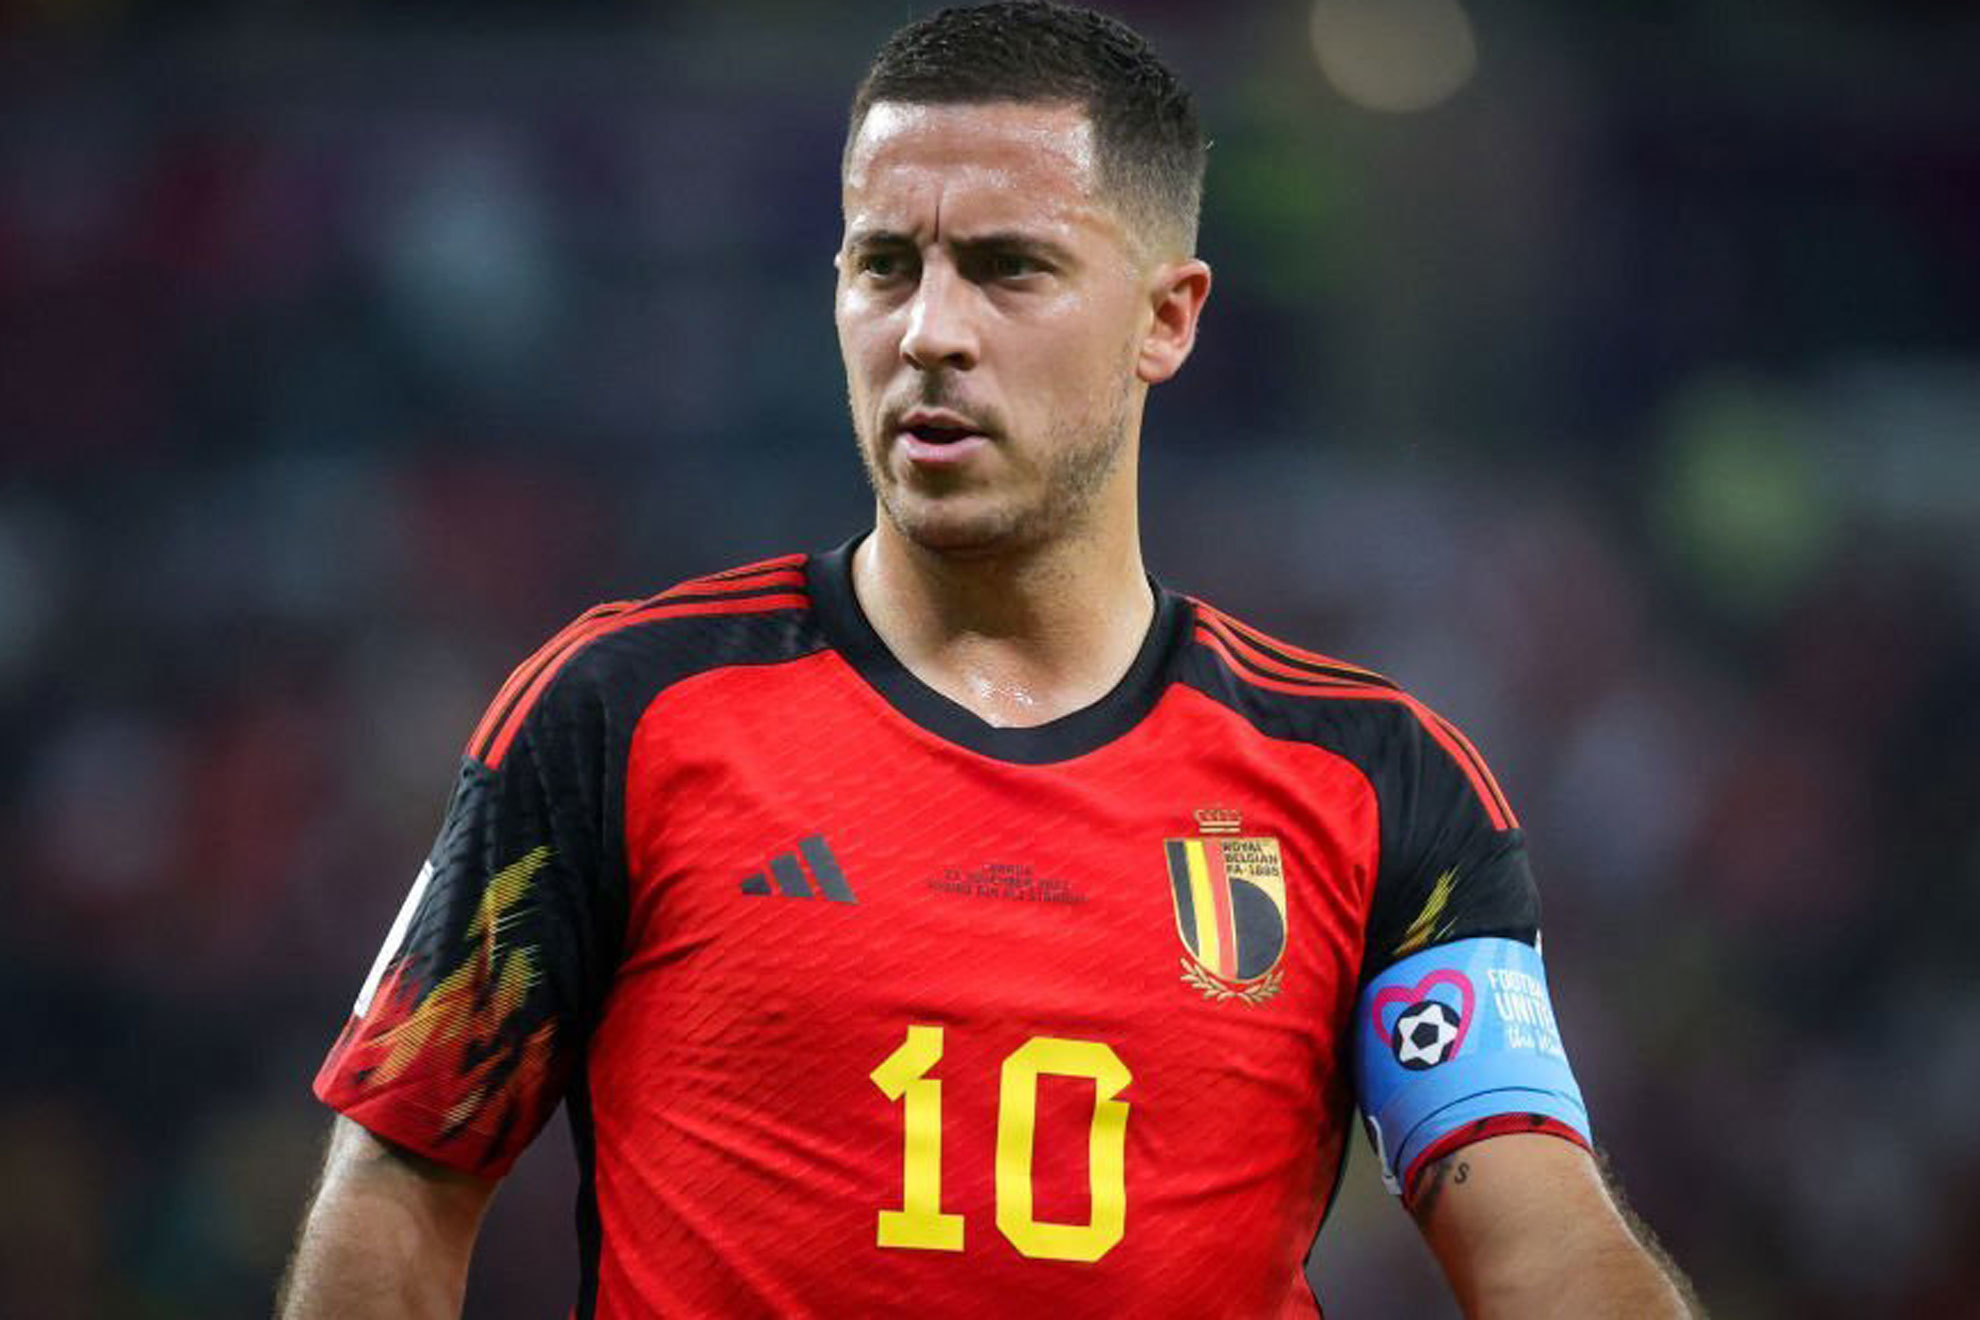 Hazard: Germany would have been better off not doing the mouth gesture and winning instead